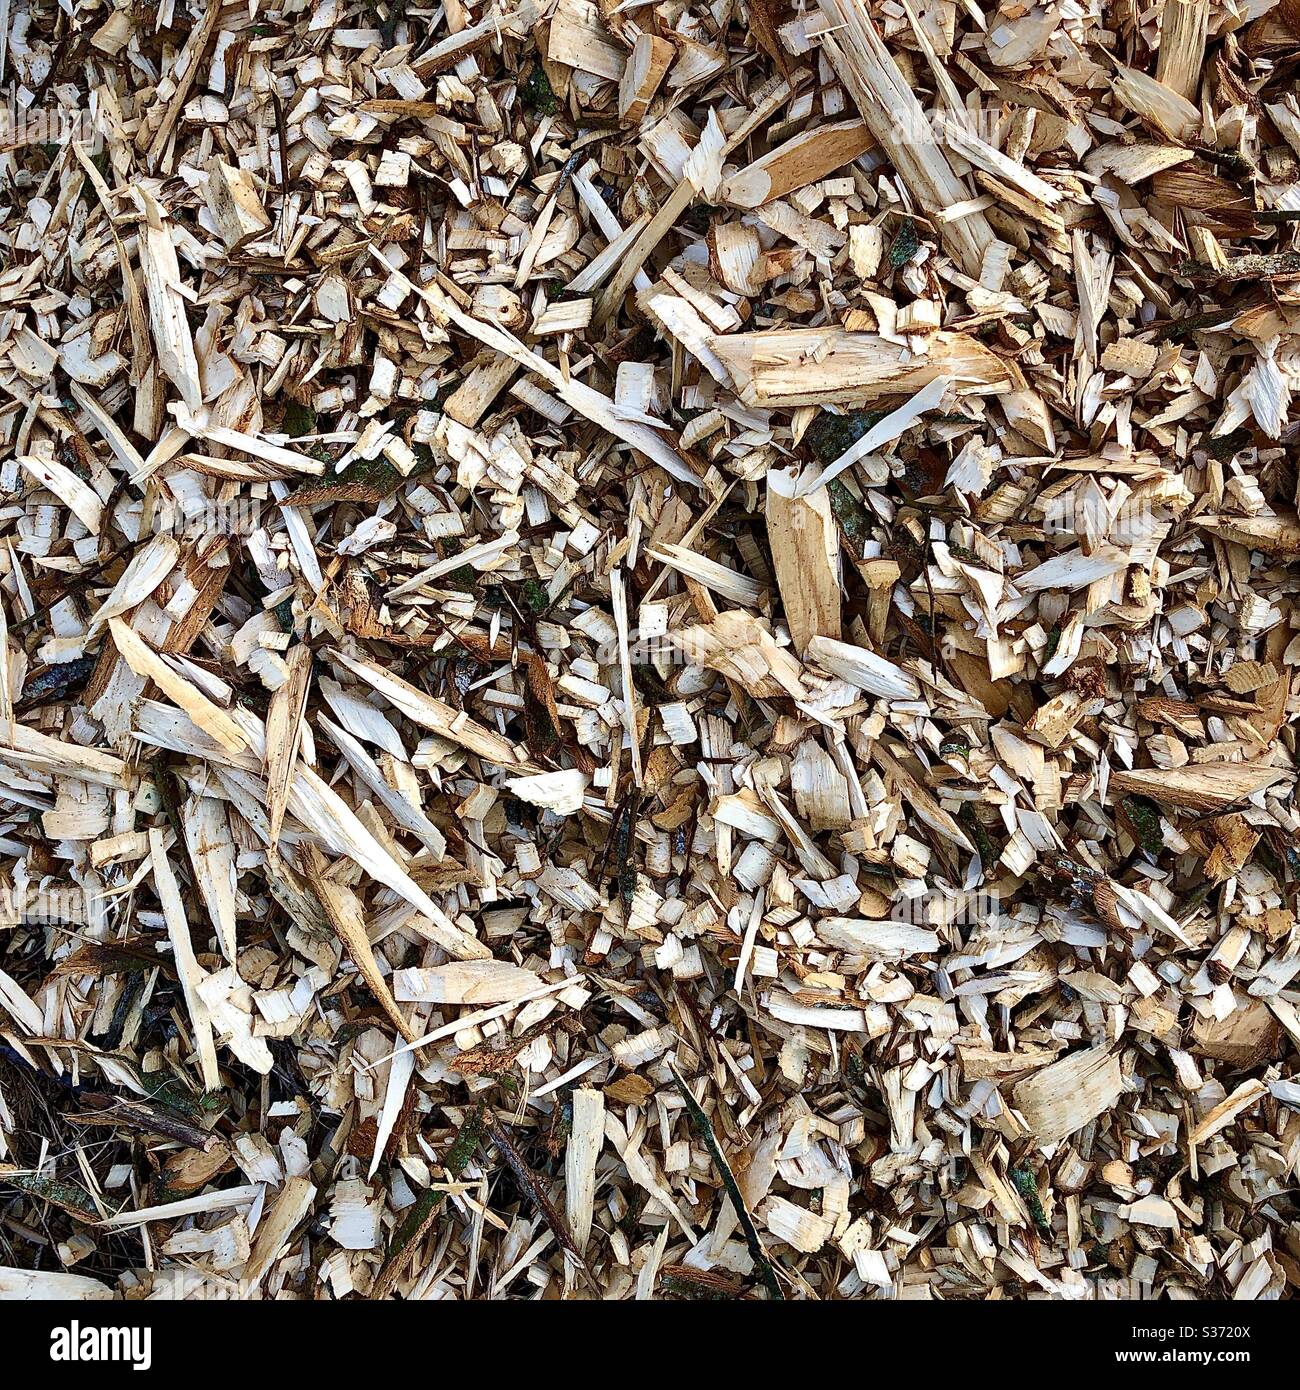 Wood clippings for use in heating stove. Stock Photo